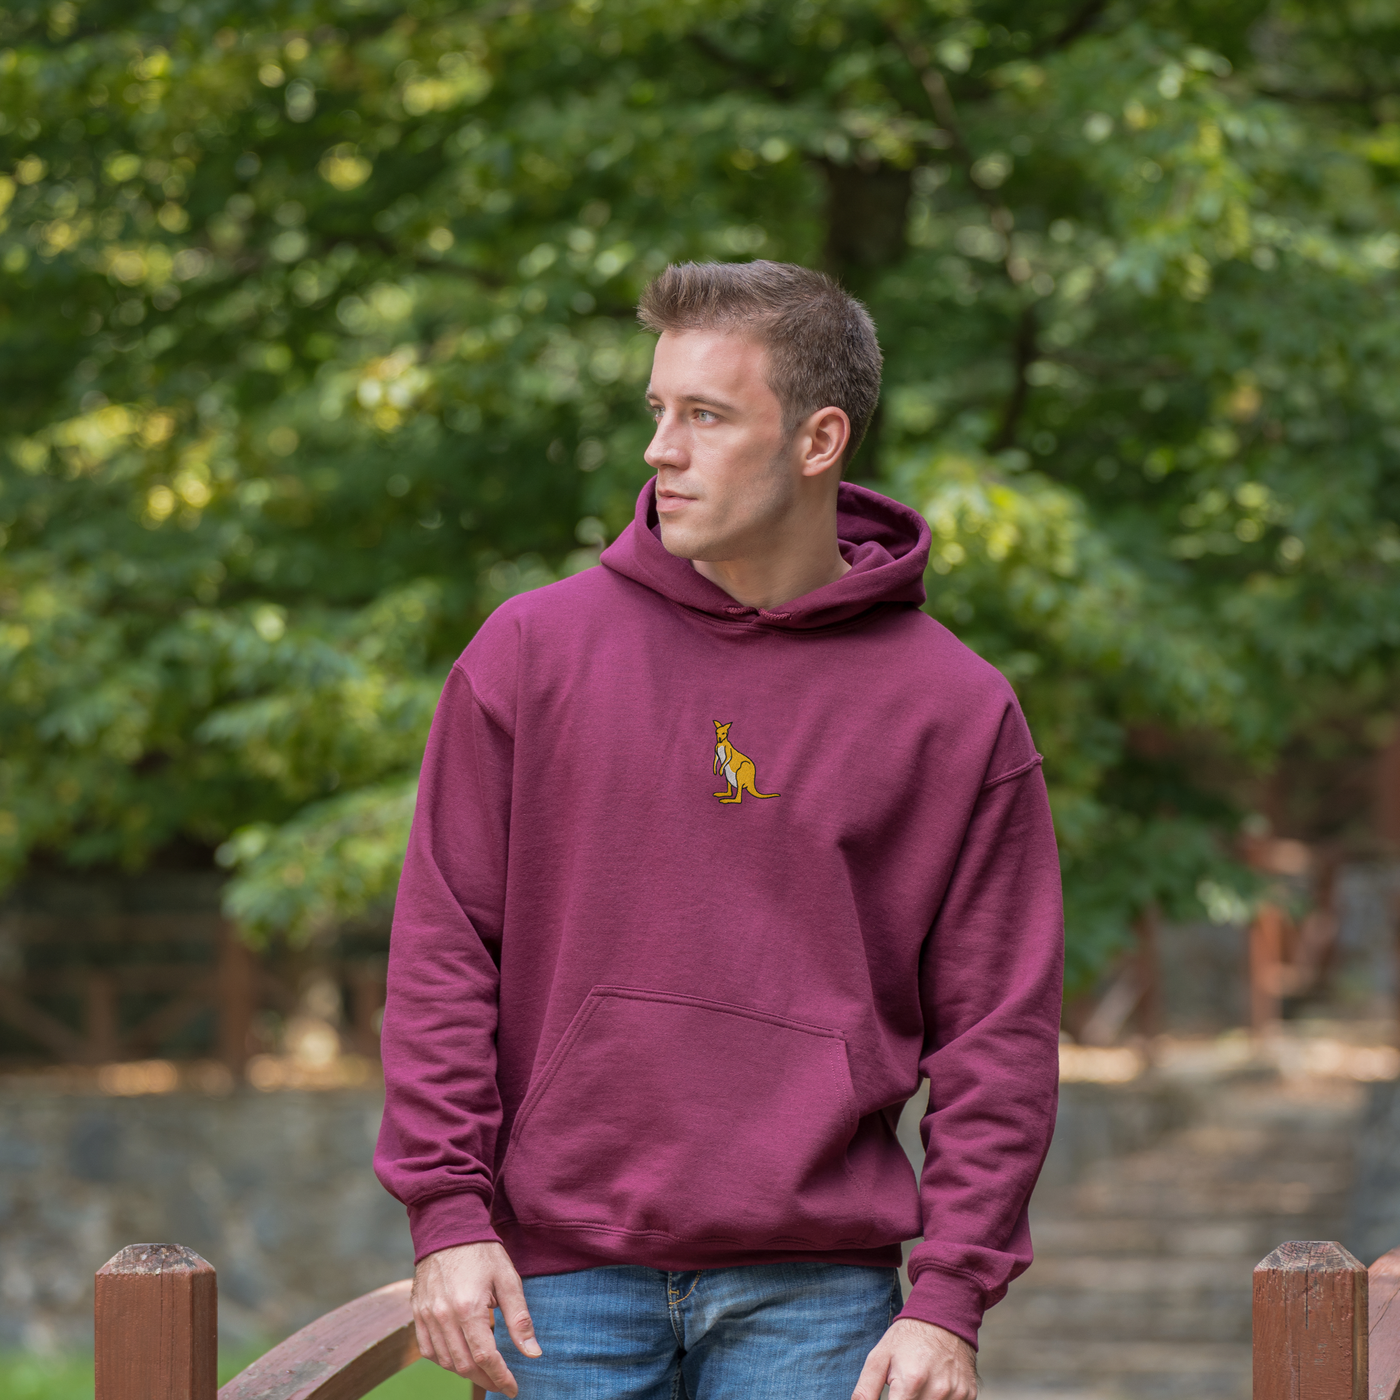 Bobby's Planet Men's Embroidered Kangaroo Hoodie from Australia Down Under Animals Collection in Maroon Color#color_maroon